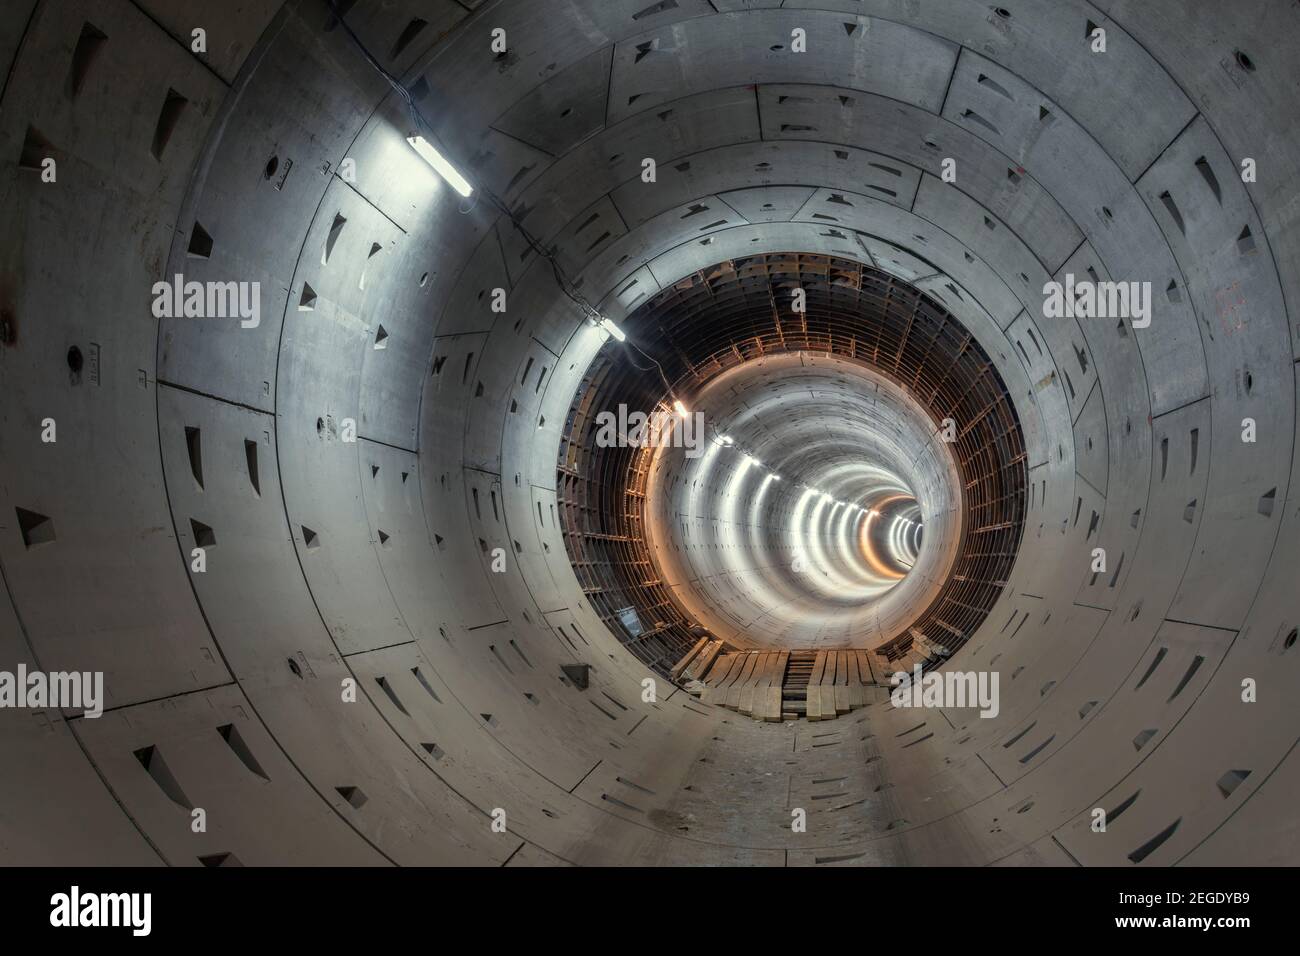 Construction of an underground metro line. New subway tunnel without rails Stock Photo